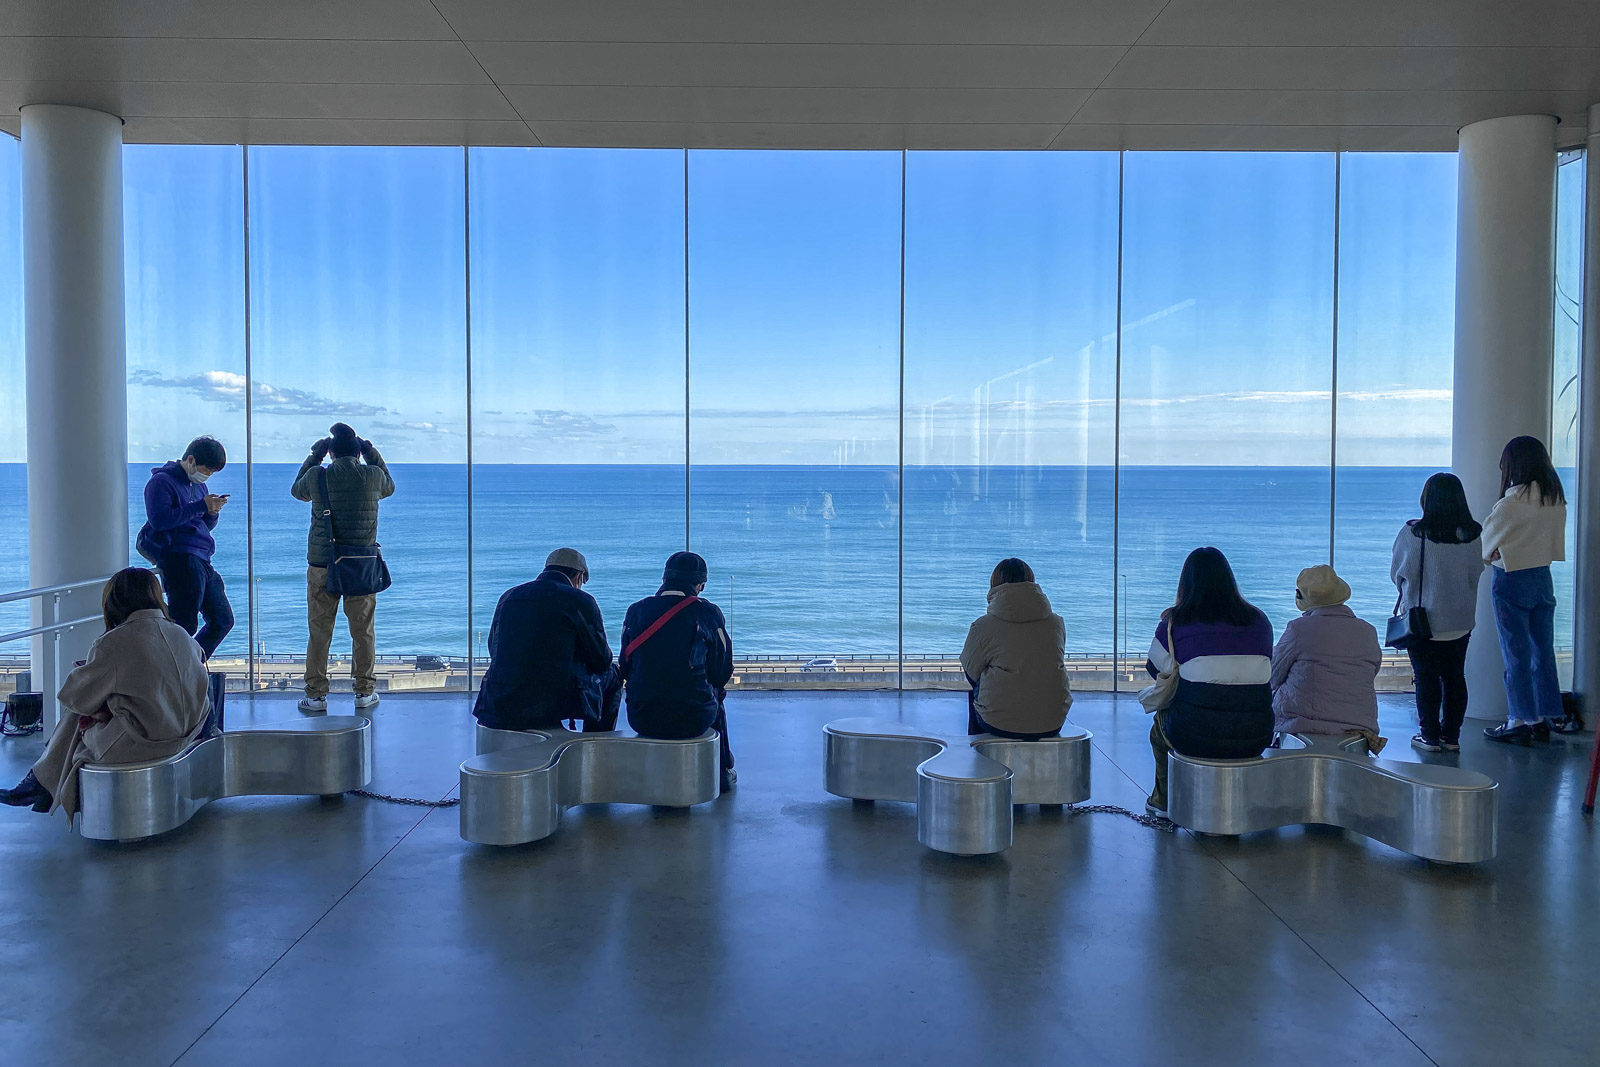 Hitachi Station, a station with a stunning view of the ocean